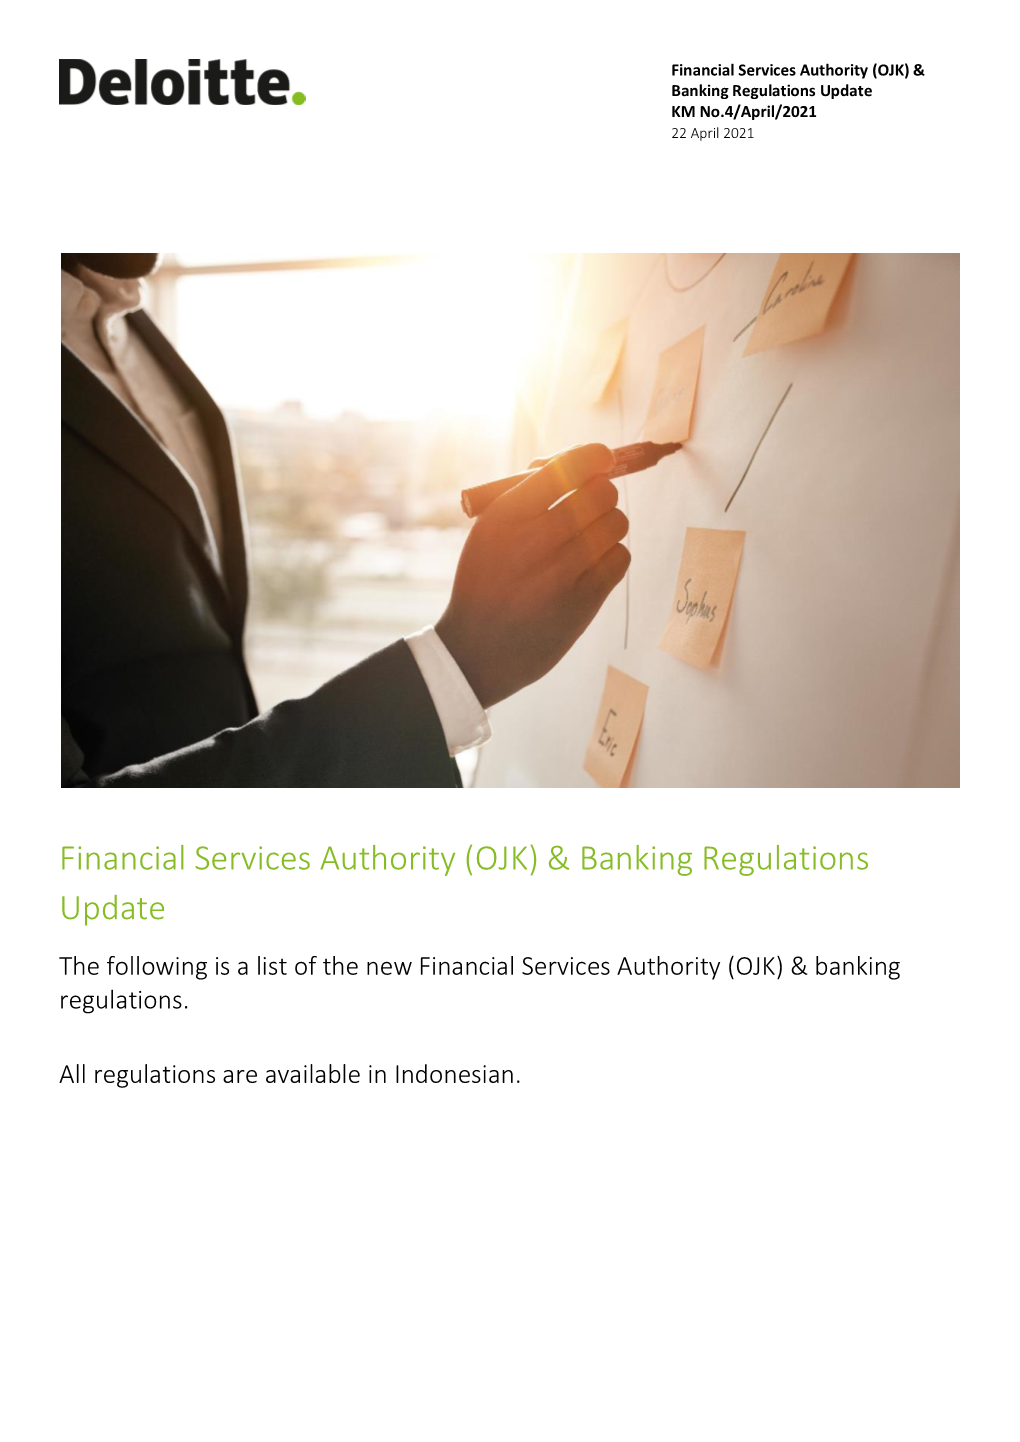 Financial Services Authority (OJK) & Banking Regulations